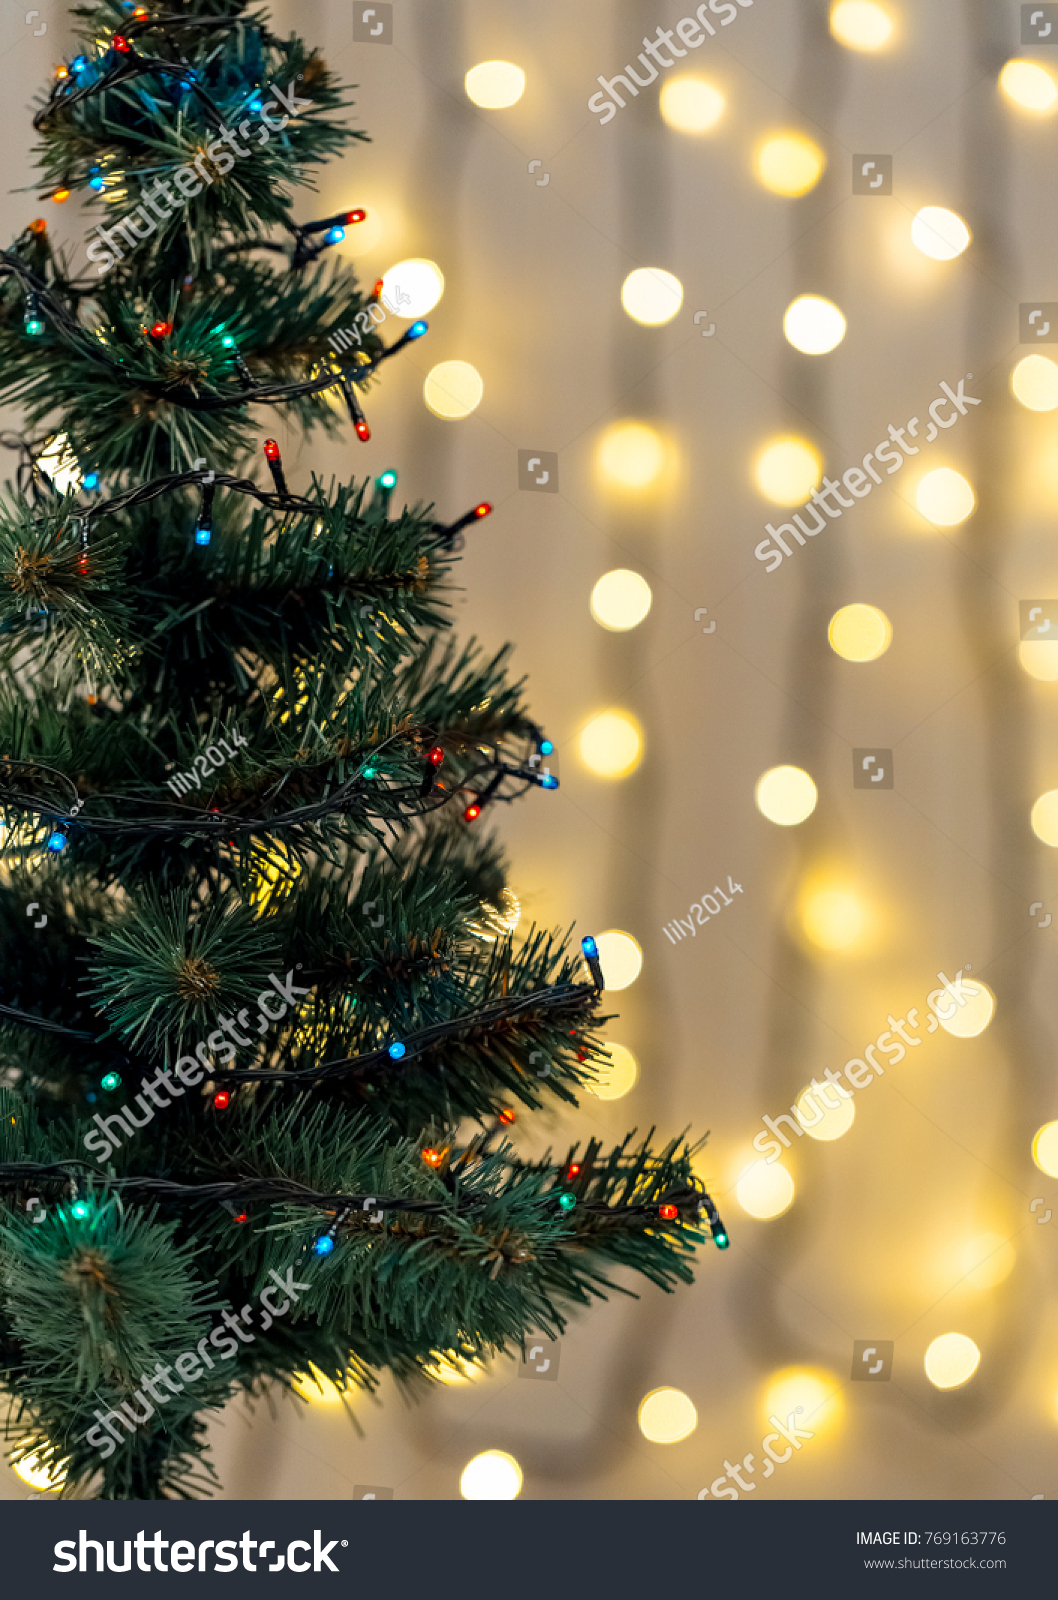 Gold Christmas background of de-focused lights garland with decorated tree #769163776